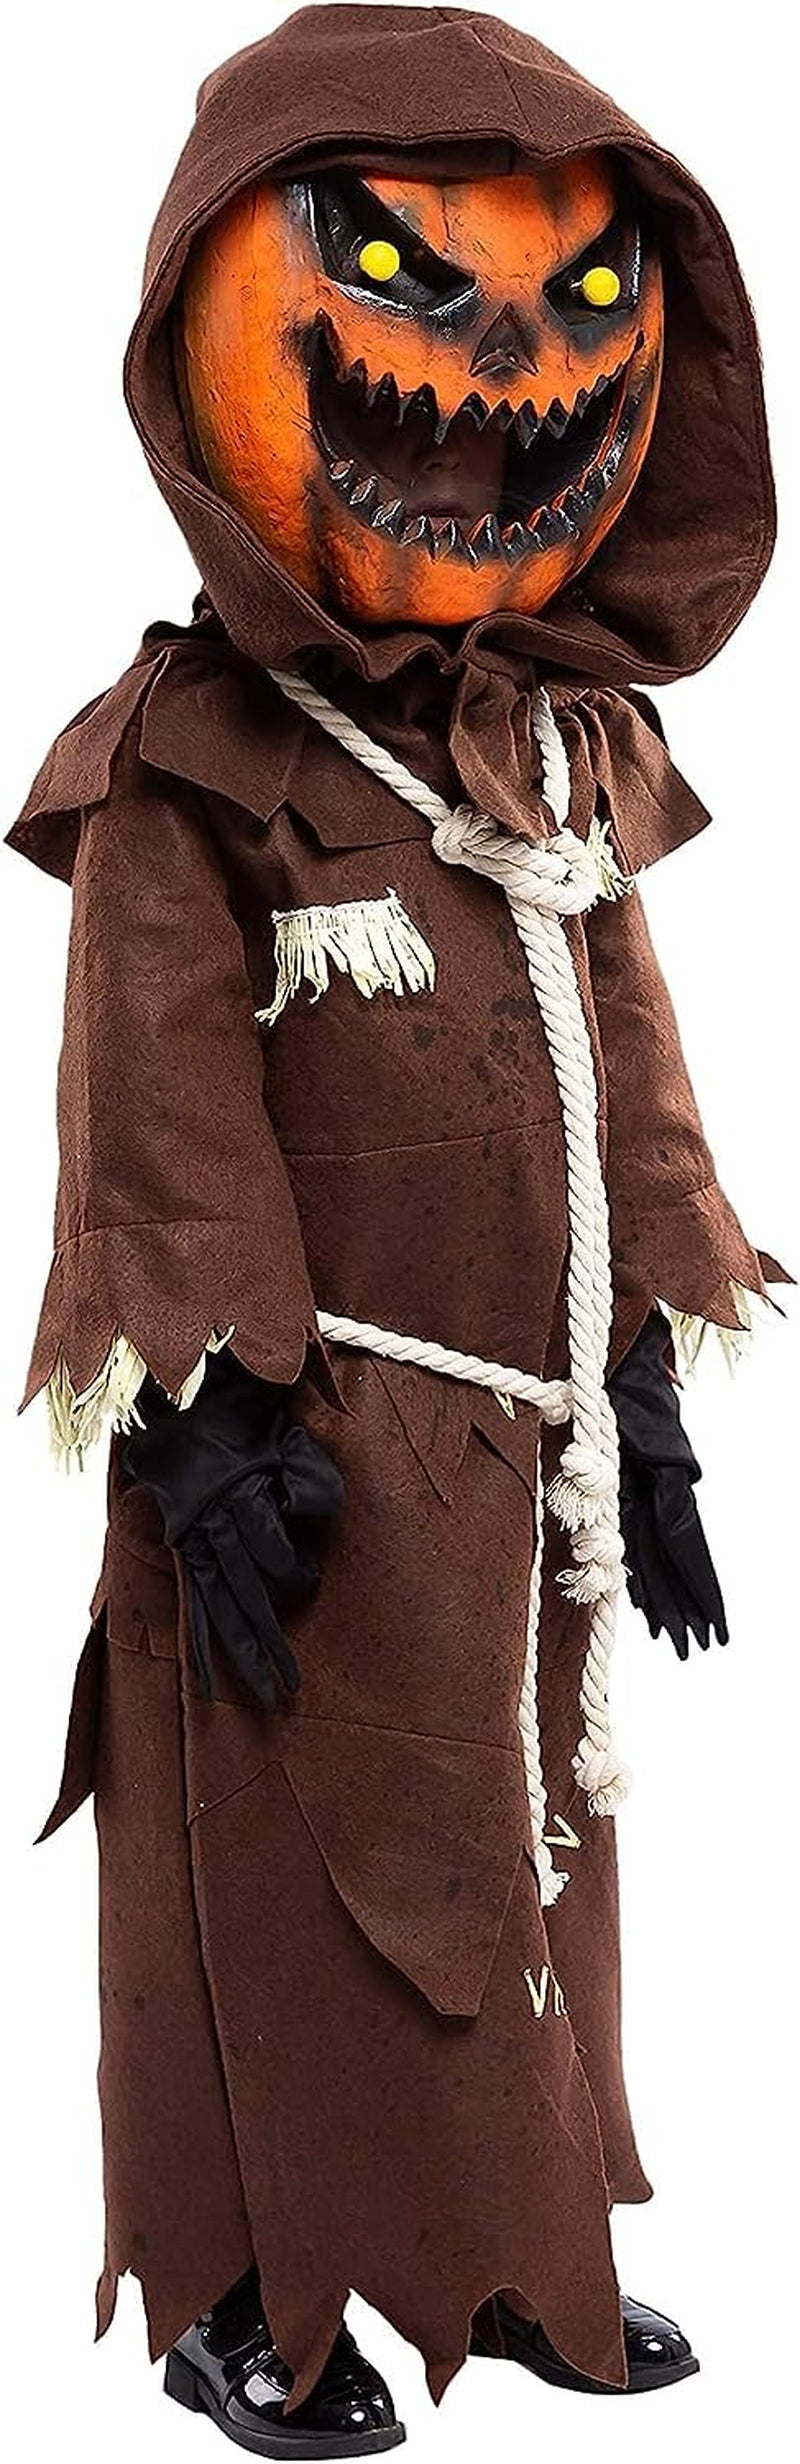 Spooktacular Creations Scary Scarecrow Pumpkin Bobble Head Costume W/Pumpkin Halloween Mask for Kids Role-Playing